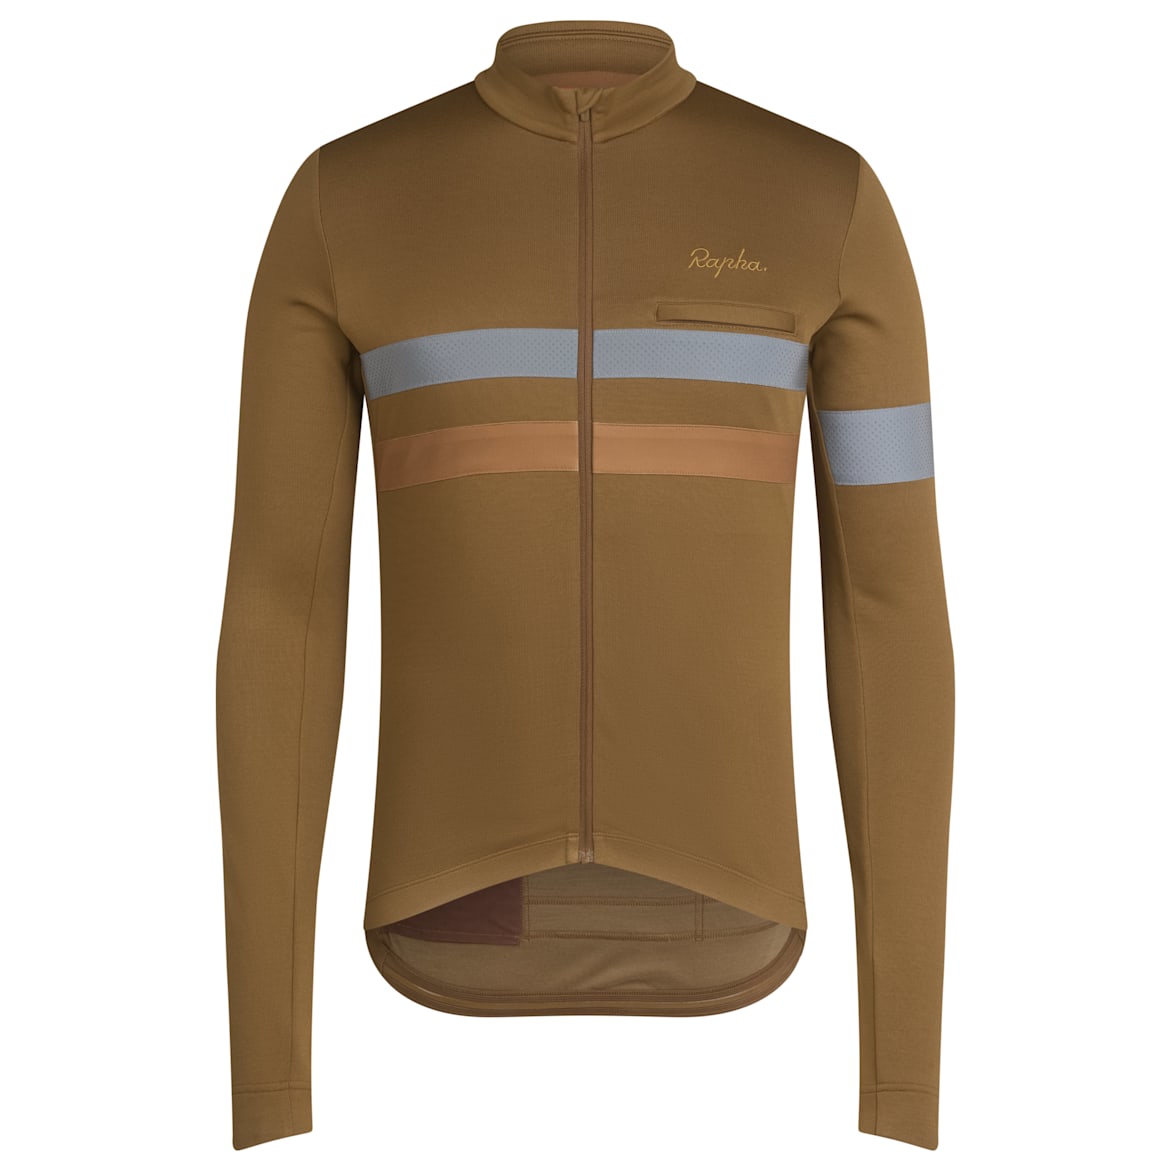 The Brevet Collection - Cycle Clothing & Accessories for Long